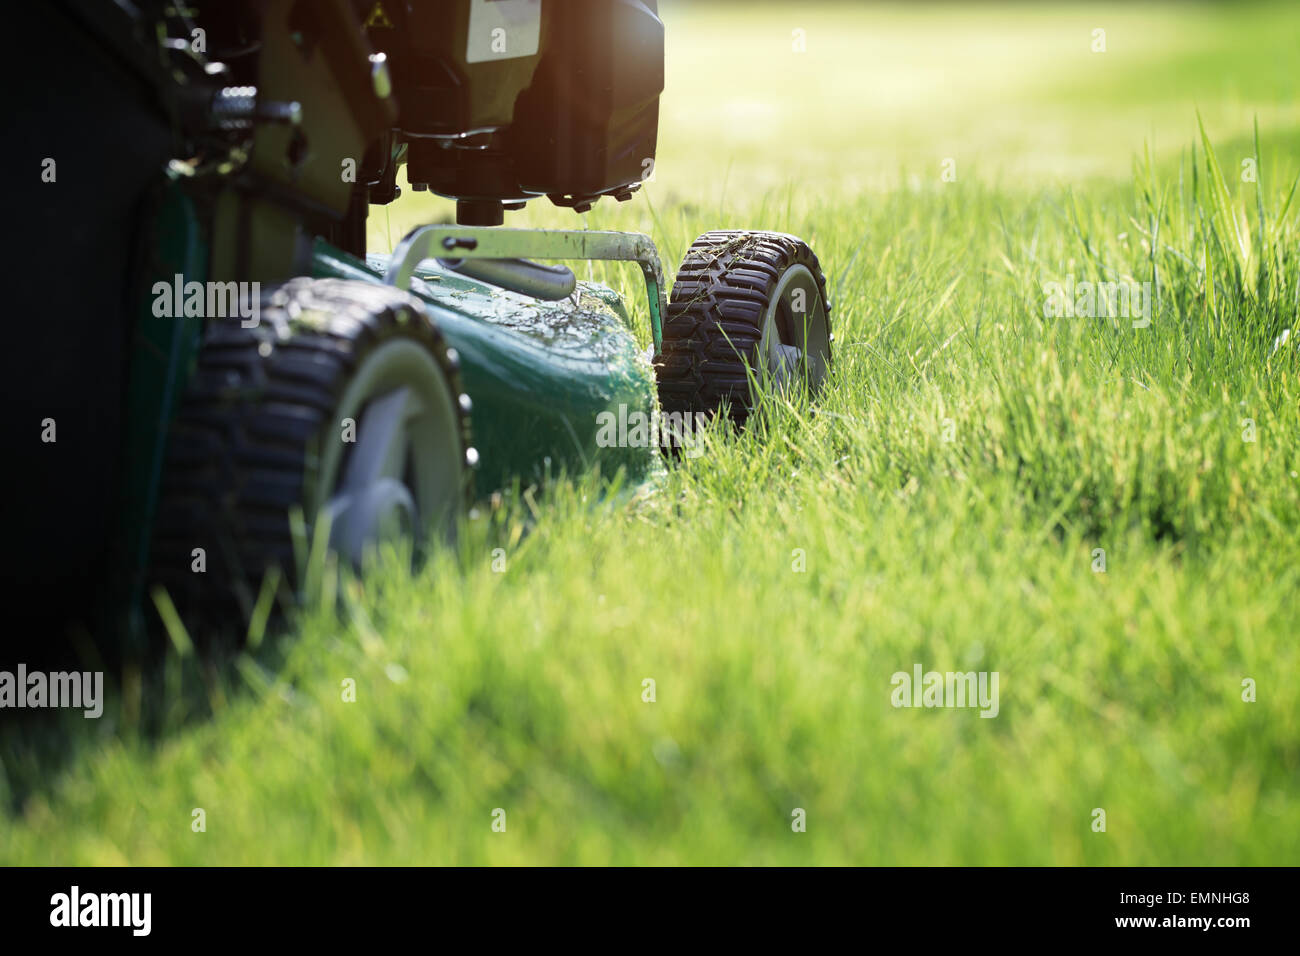 Mowing the grass Stock Photo